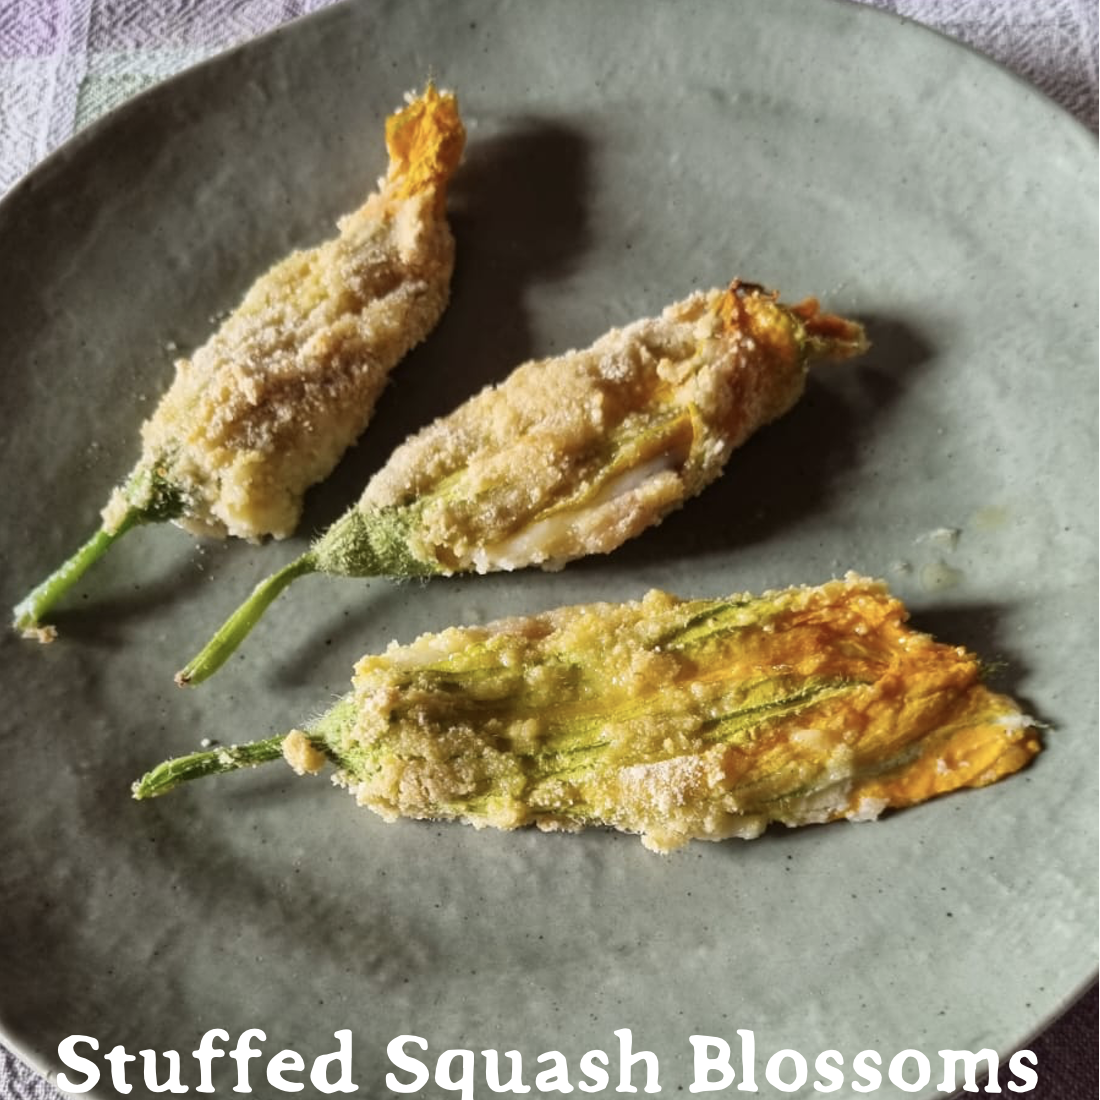 Three lightly breaded and baked vibrant zucchini flowers on a rustic gray ceramic plate, on a light green and lavender checked tablecloth. "Stuffed Squash Blossoms" is written at the bottom.